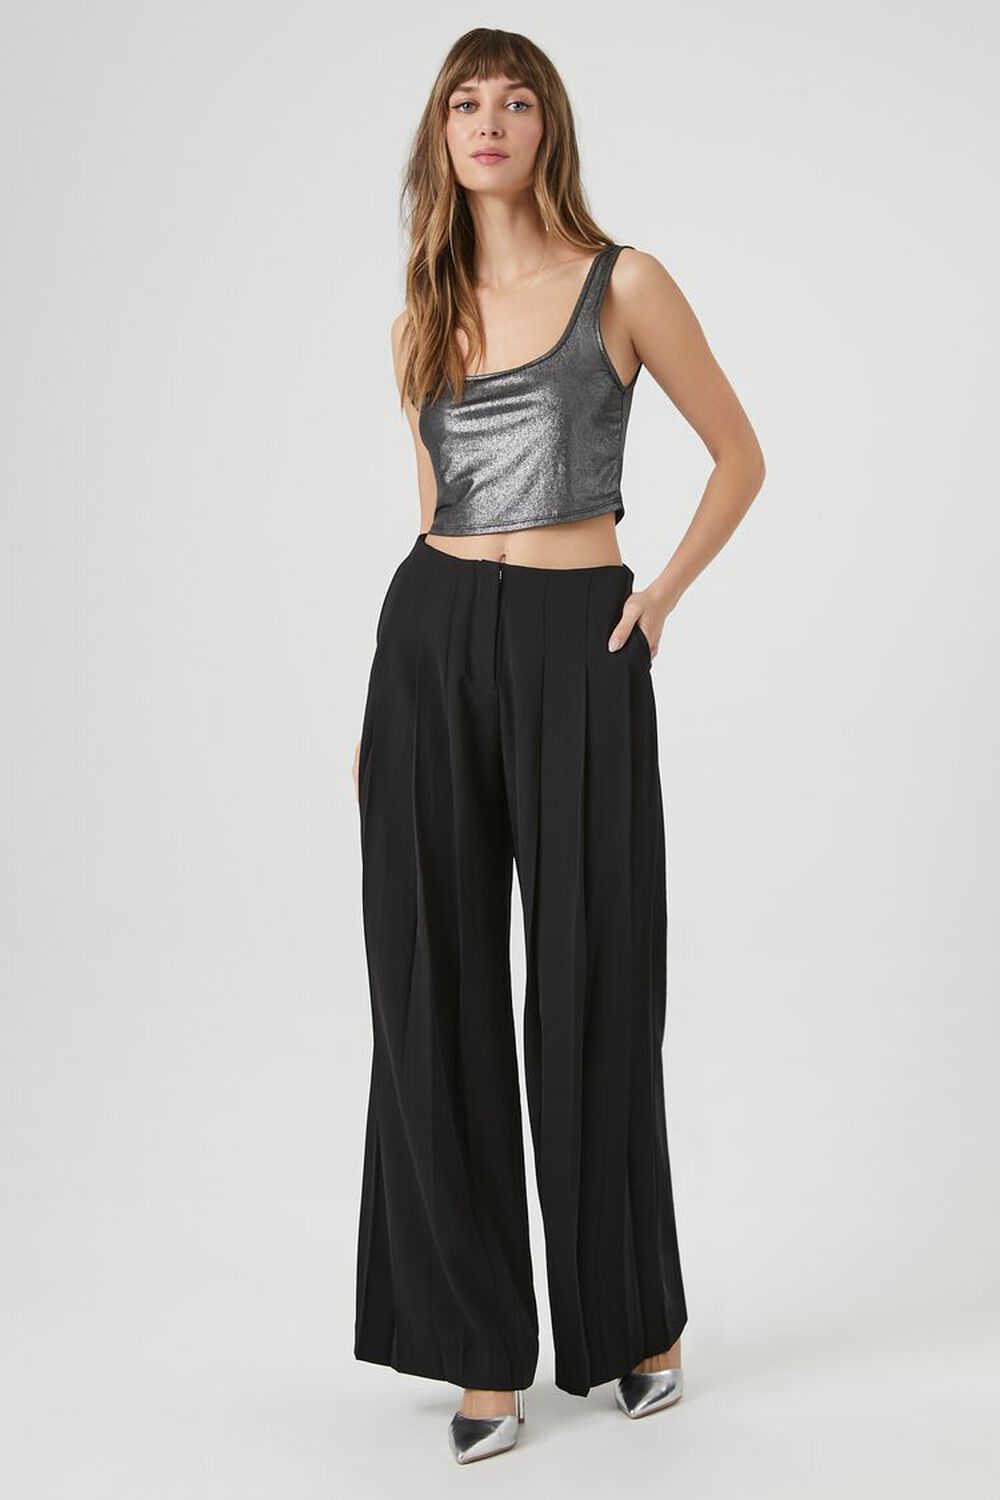 Forever 21 Women's Pleated Wide-Leg Palazzo Pants Black